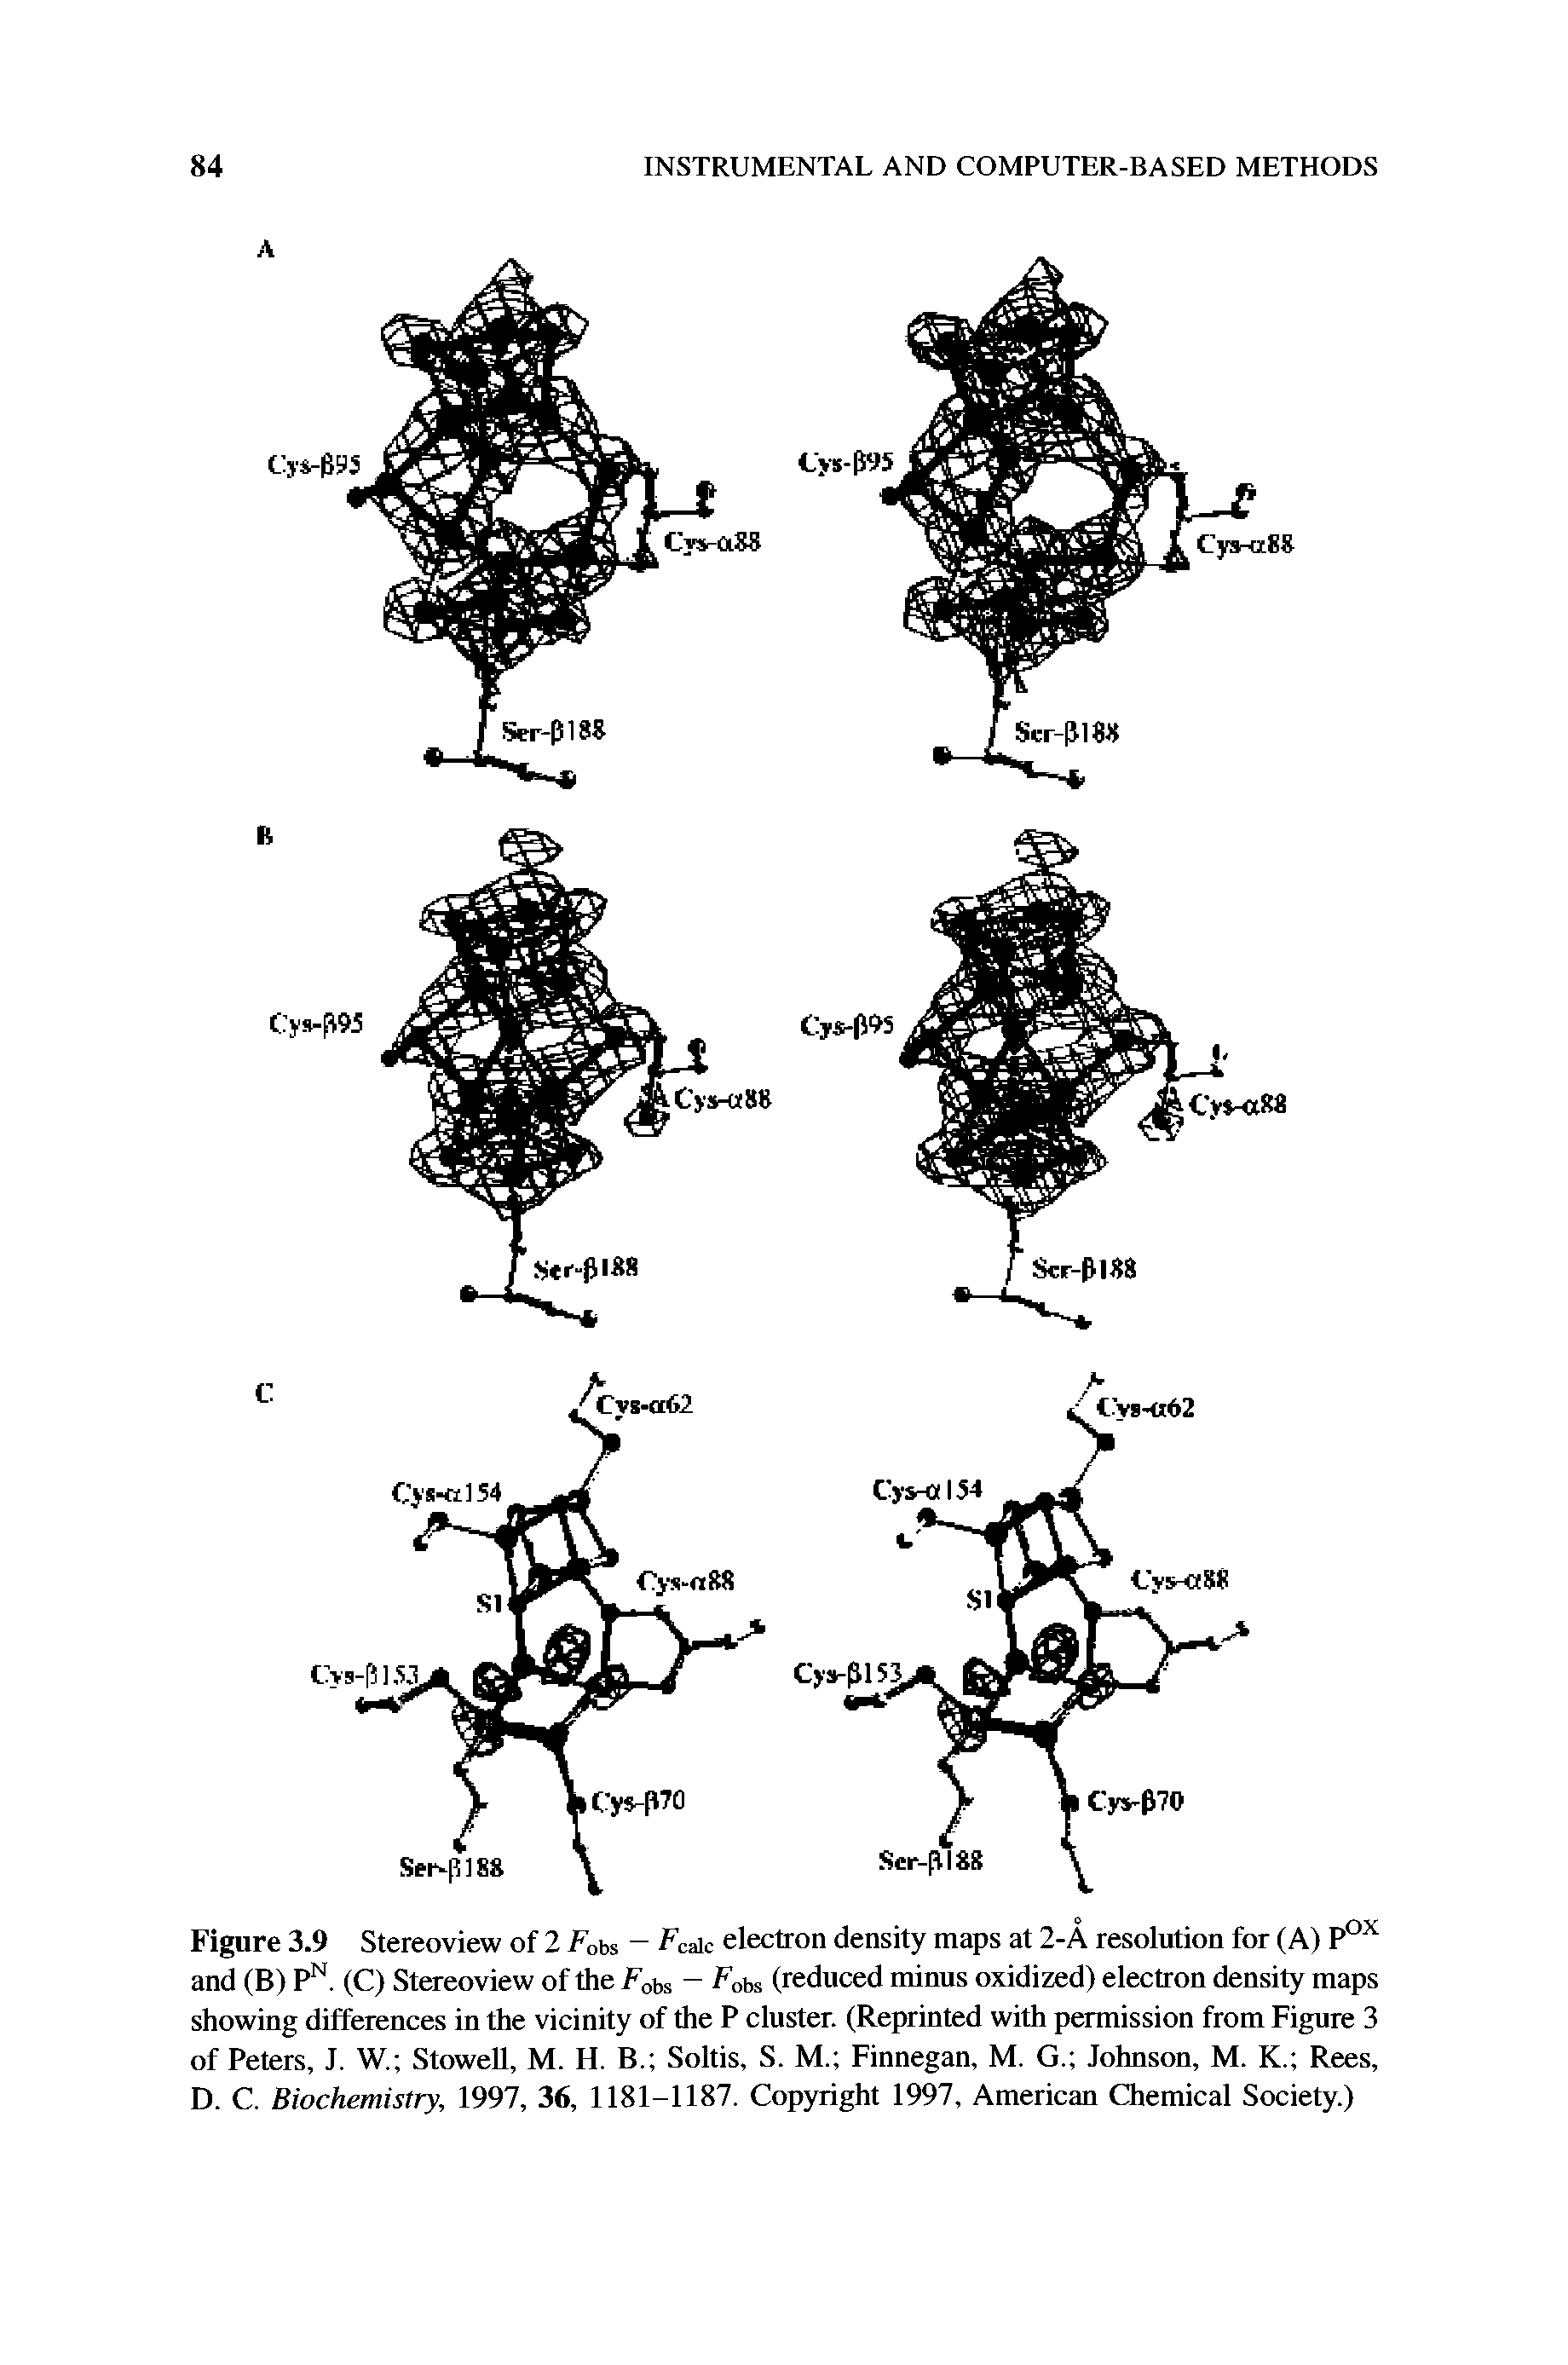 Figure 3.9 Stereoview of 2 F0bs - Fcaic electron density maps at 2-A resolution for (A) Pox and (B) PN. (C) Stereoview of the Fobs - Fobs (reduced minus oxidized) electron density maps showing differences in the vicinity of the P cluster. (Reprinted with permission from Figure 3 of Peters, J. W. Stowell, M. H. B. Soltis, S. M. Finnegan, M. G. Johnson, M. K. Rees, D. C. Biochemistry, 1997, 36, 1181-1187. Copyright 1997, American Chemical Society.)...